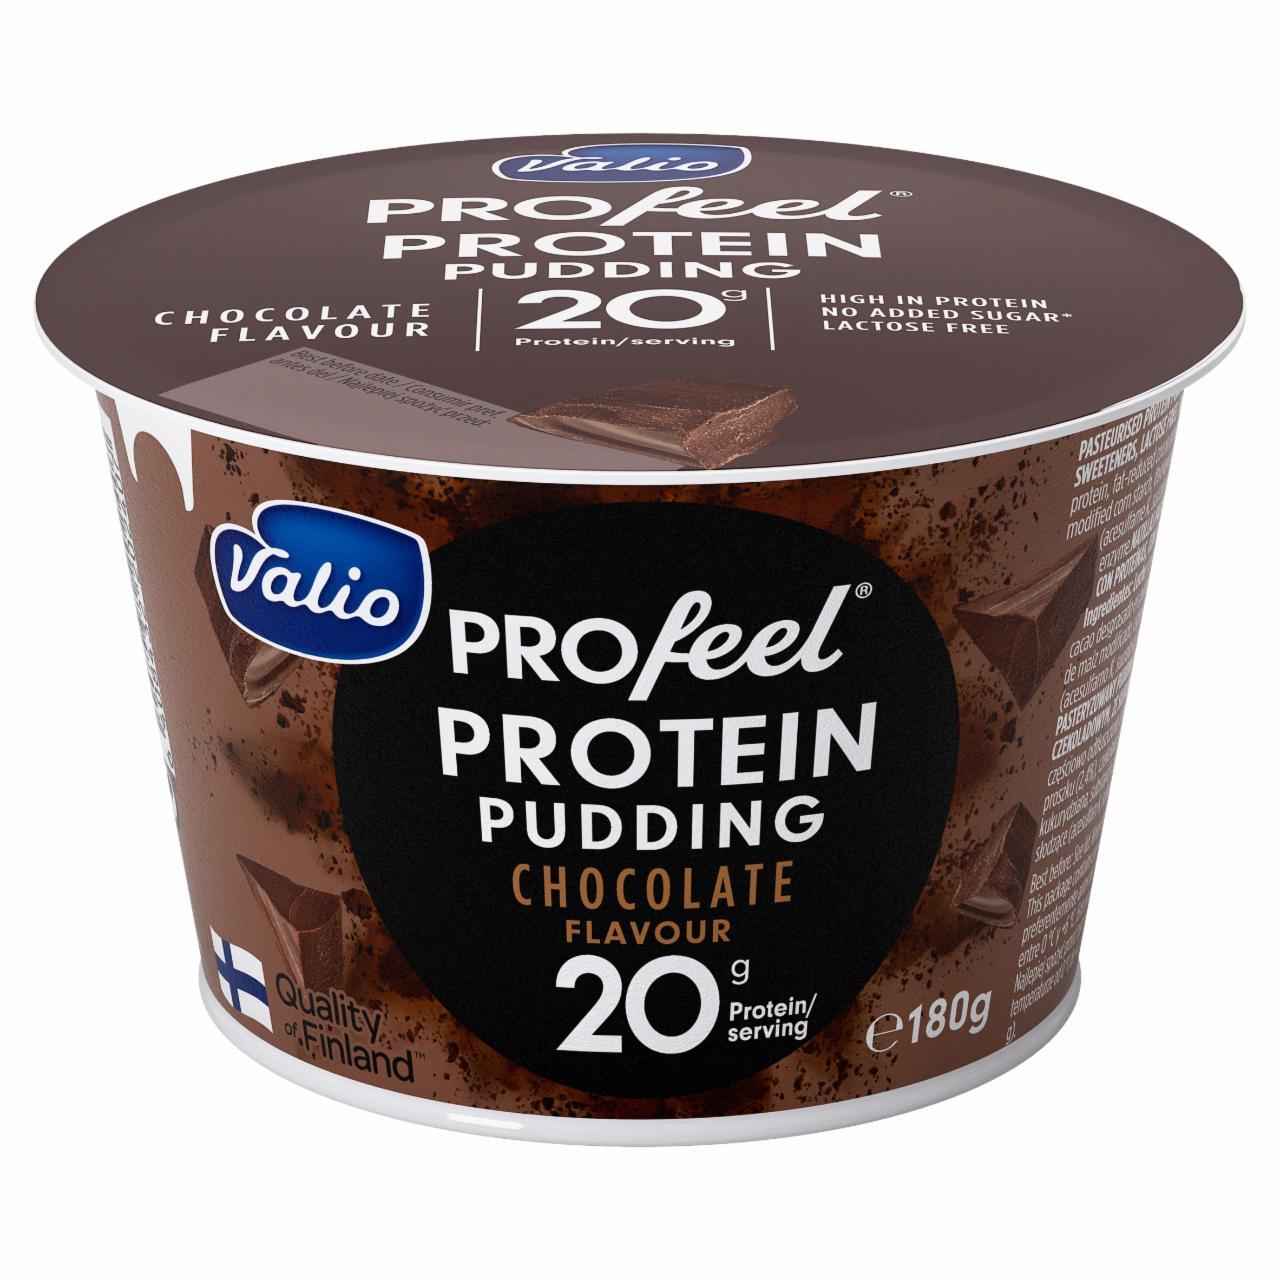 Photo - Profeel Proteing Pudding 20g Chocolate flavour Valio